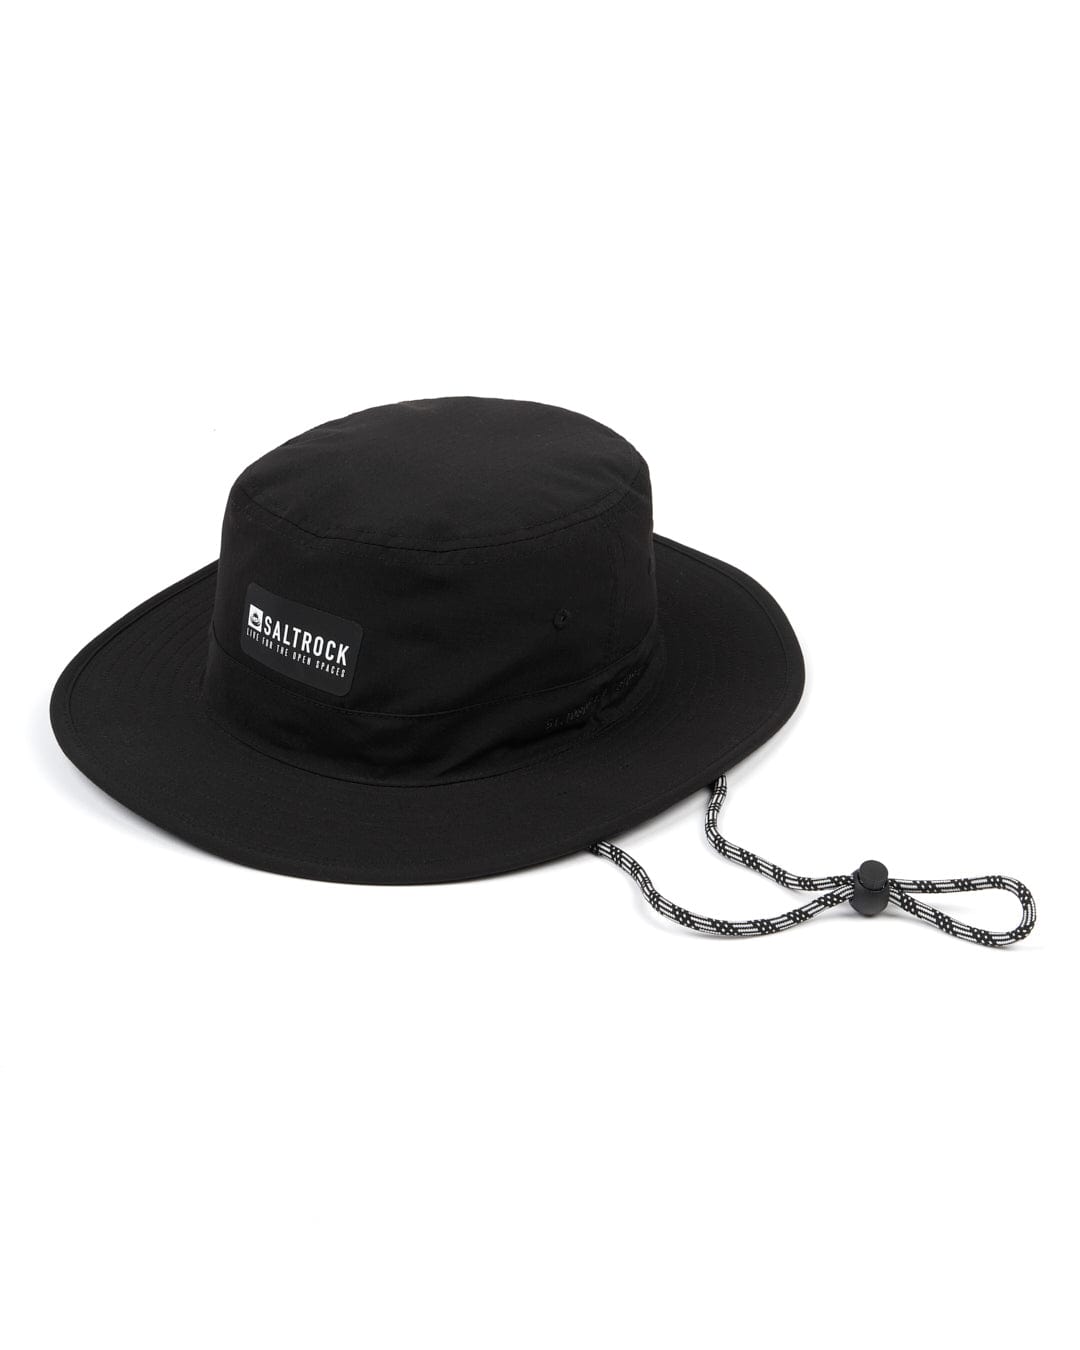 A black Saltrock bucket hat with a rope attached to it for UPF protection.